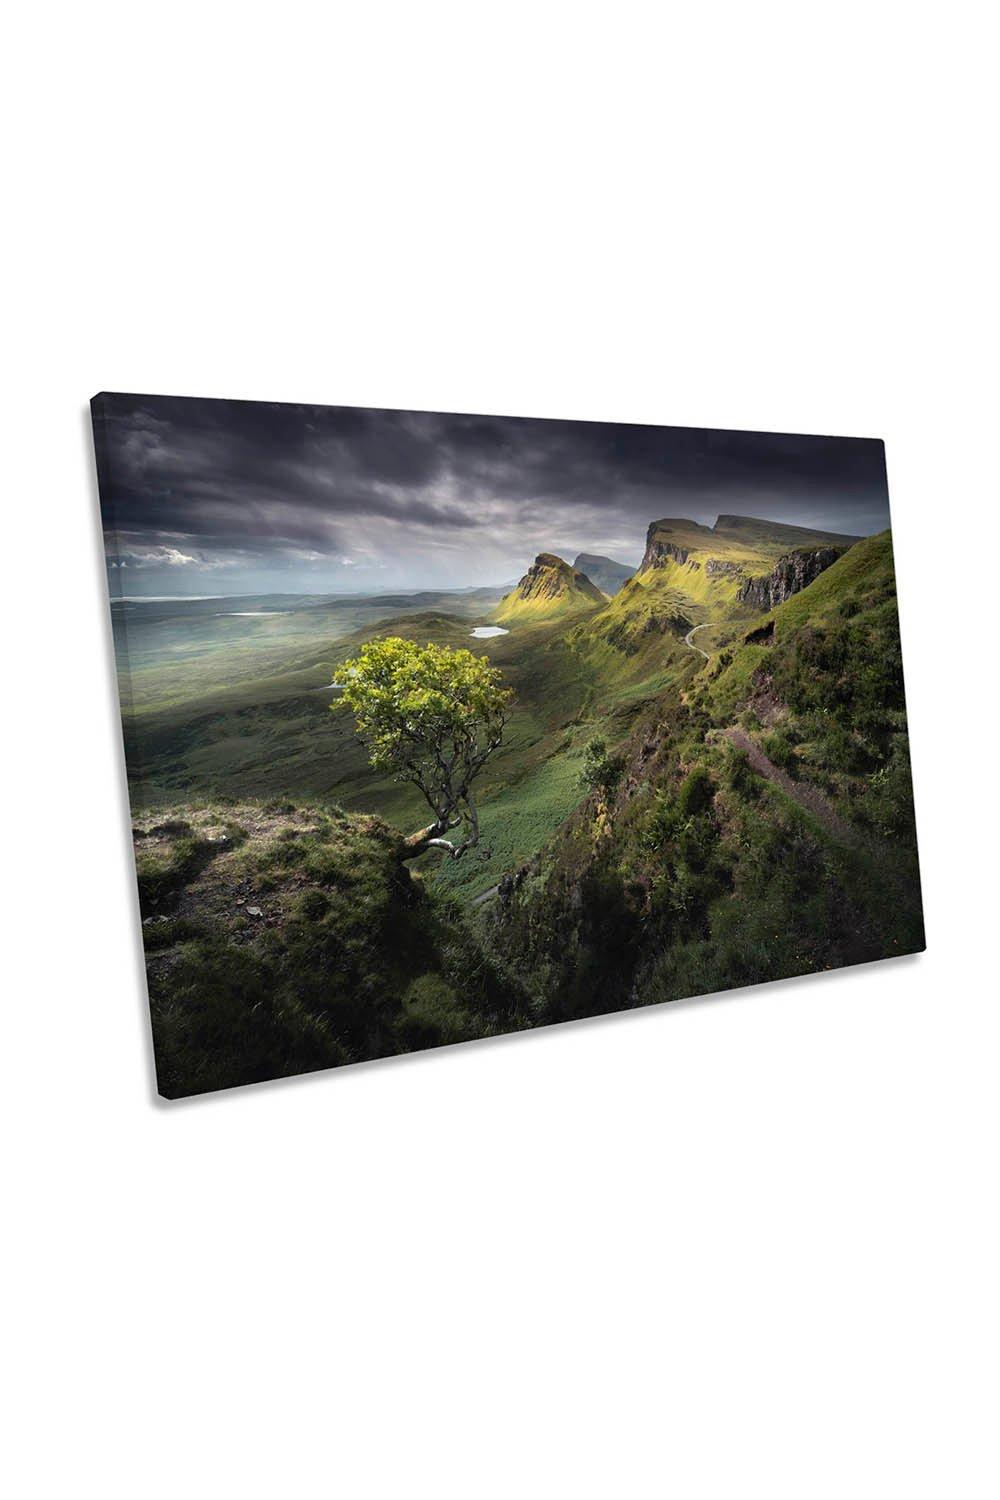 Quiraing Isle of Skye Scottish Highlands Canvas Wall Art Picture Print